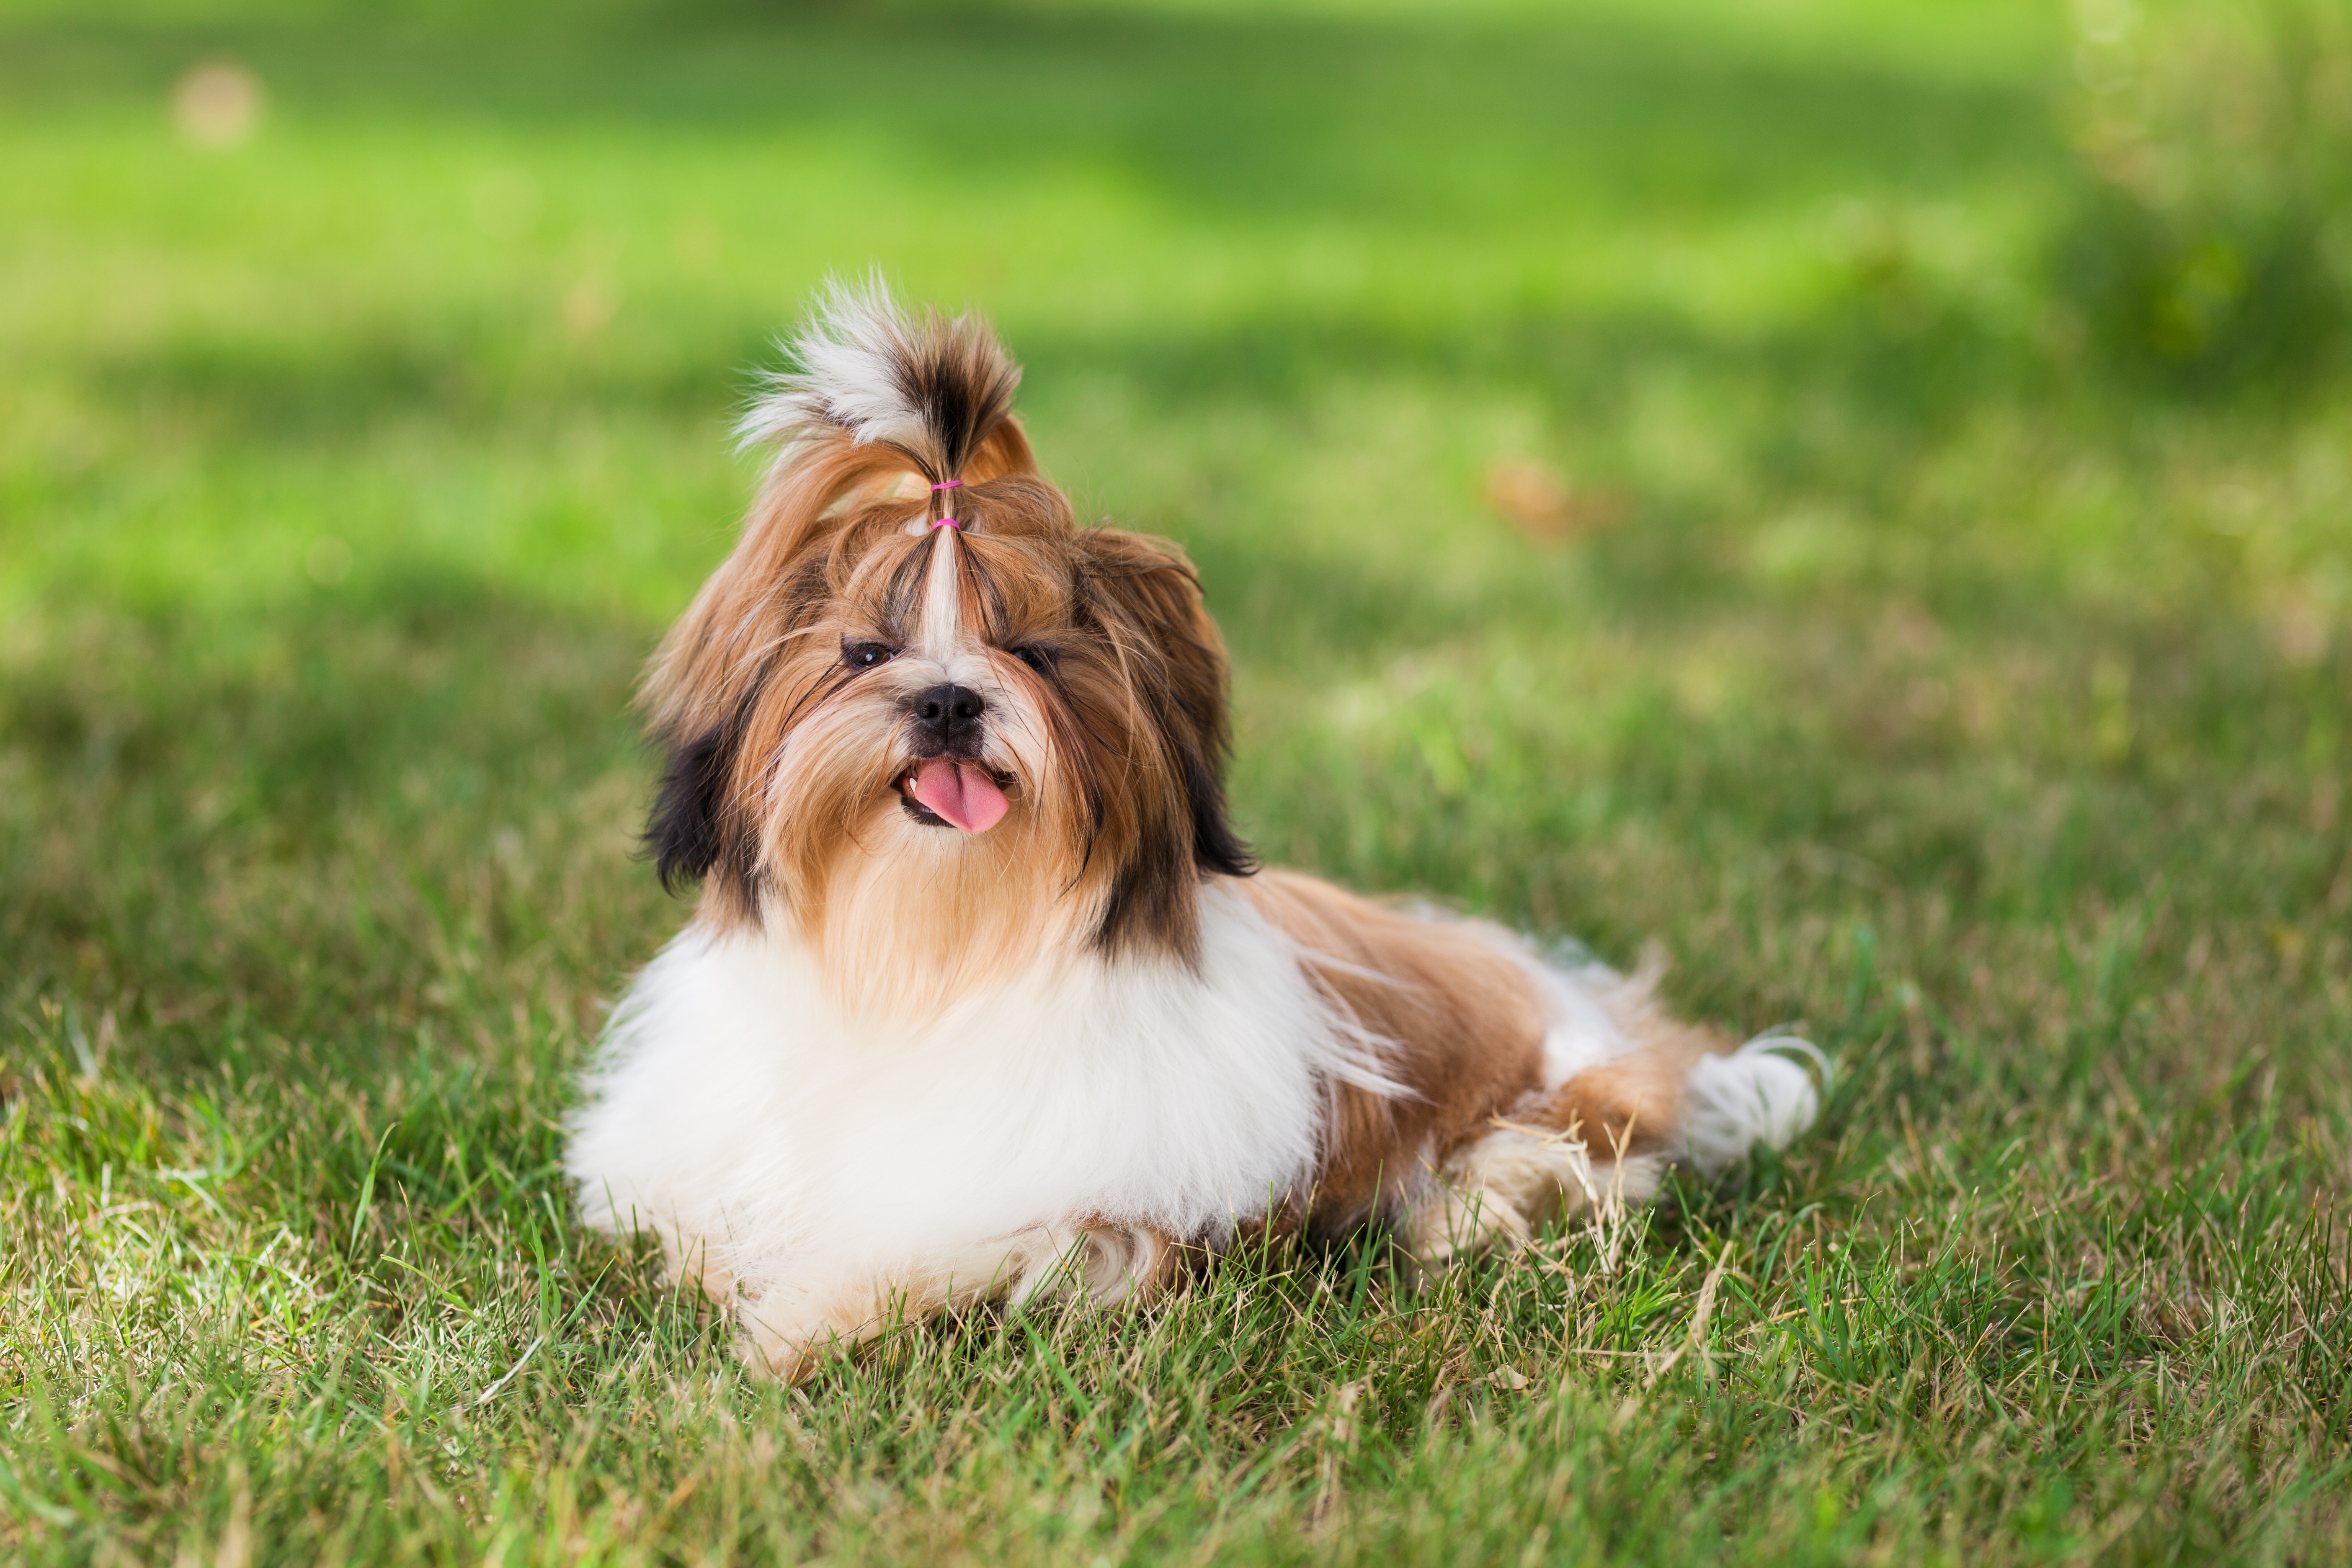 7 Gorgeous Shih Tzu Hair Styles to Keep You Turning Heads  Graypets